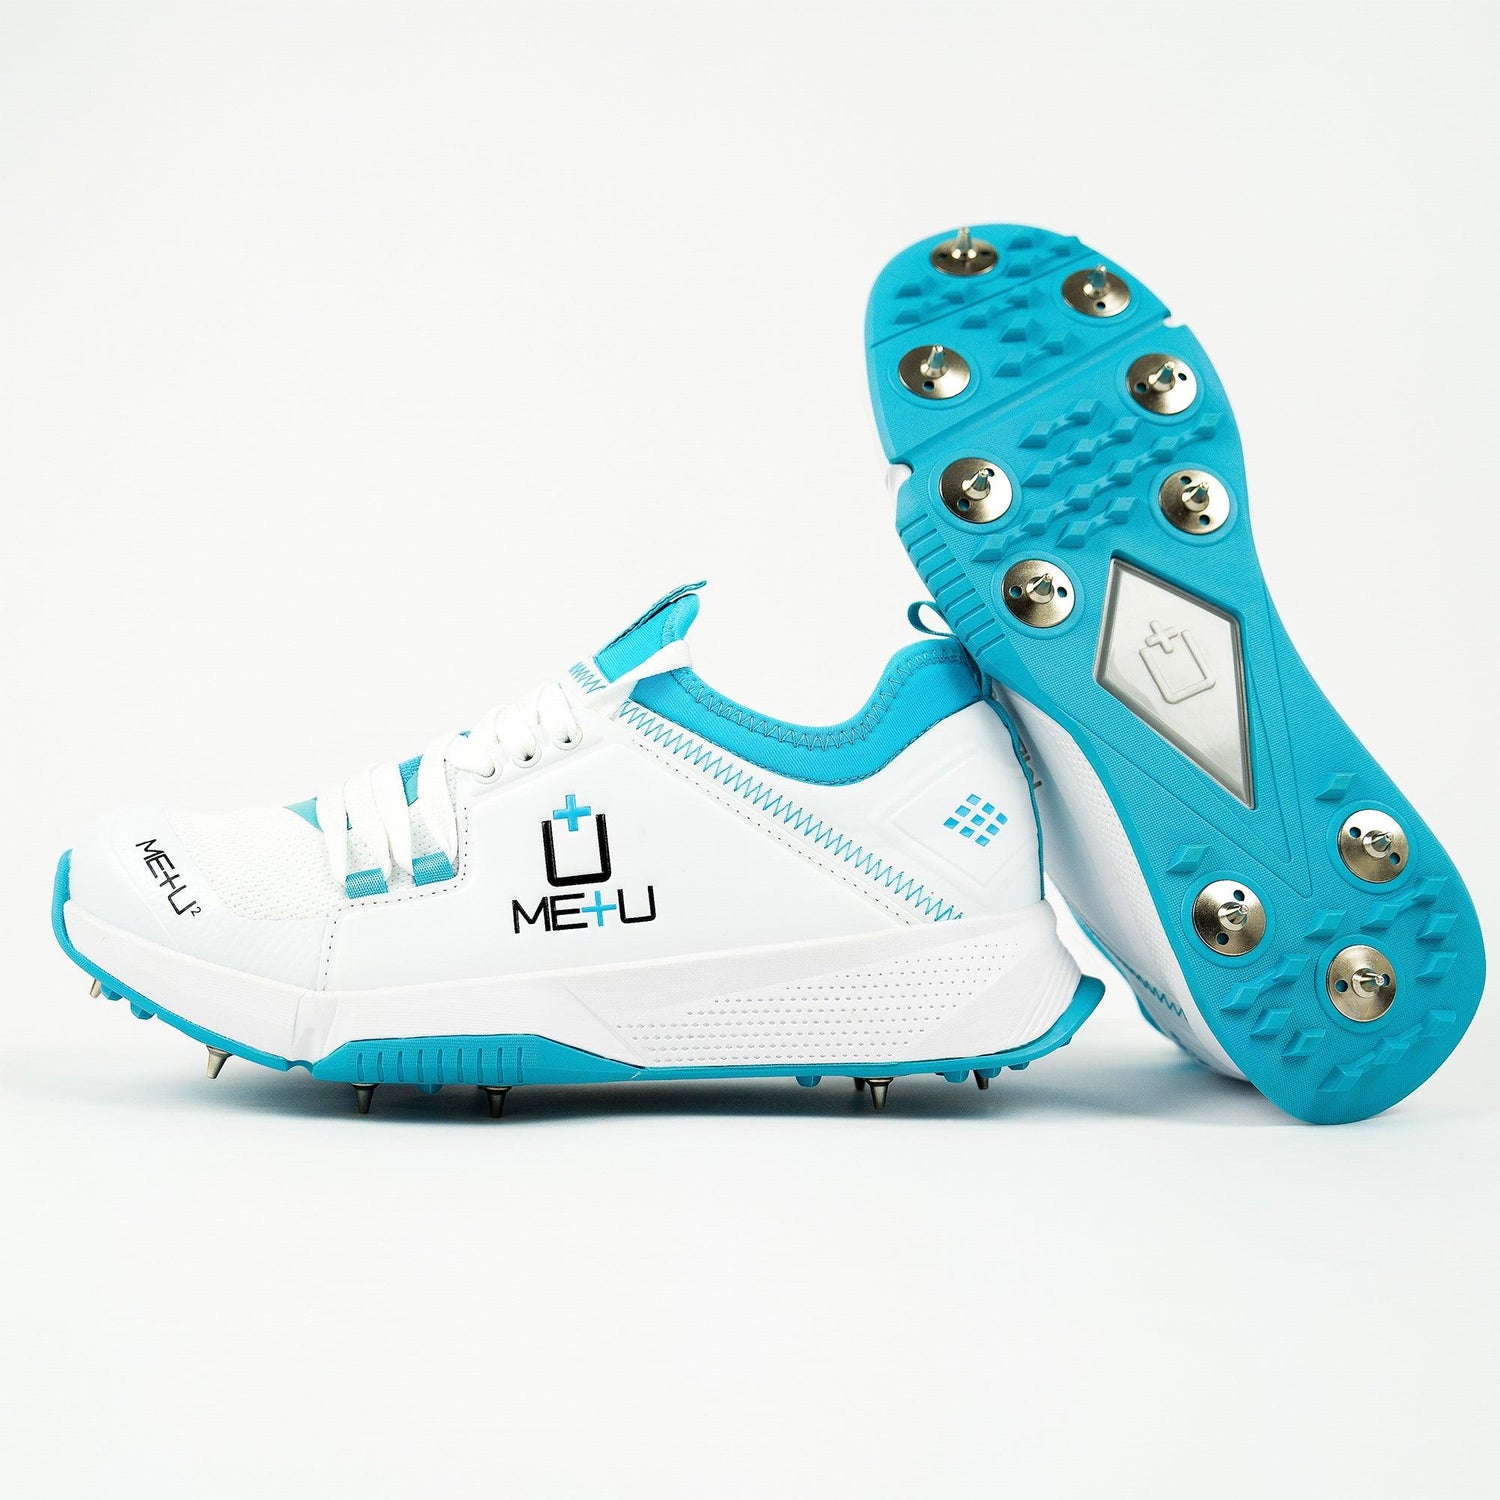 ME+U Mens All Rounder Cricket Shoes side profile  and stud detail with Blue Colours on white background